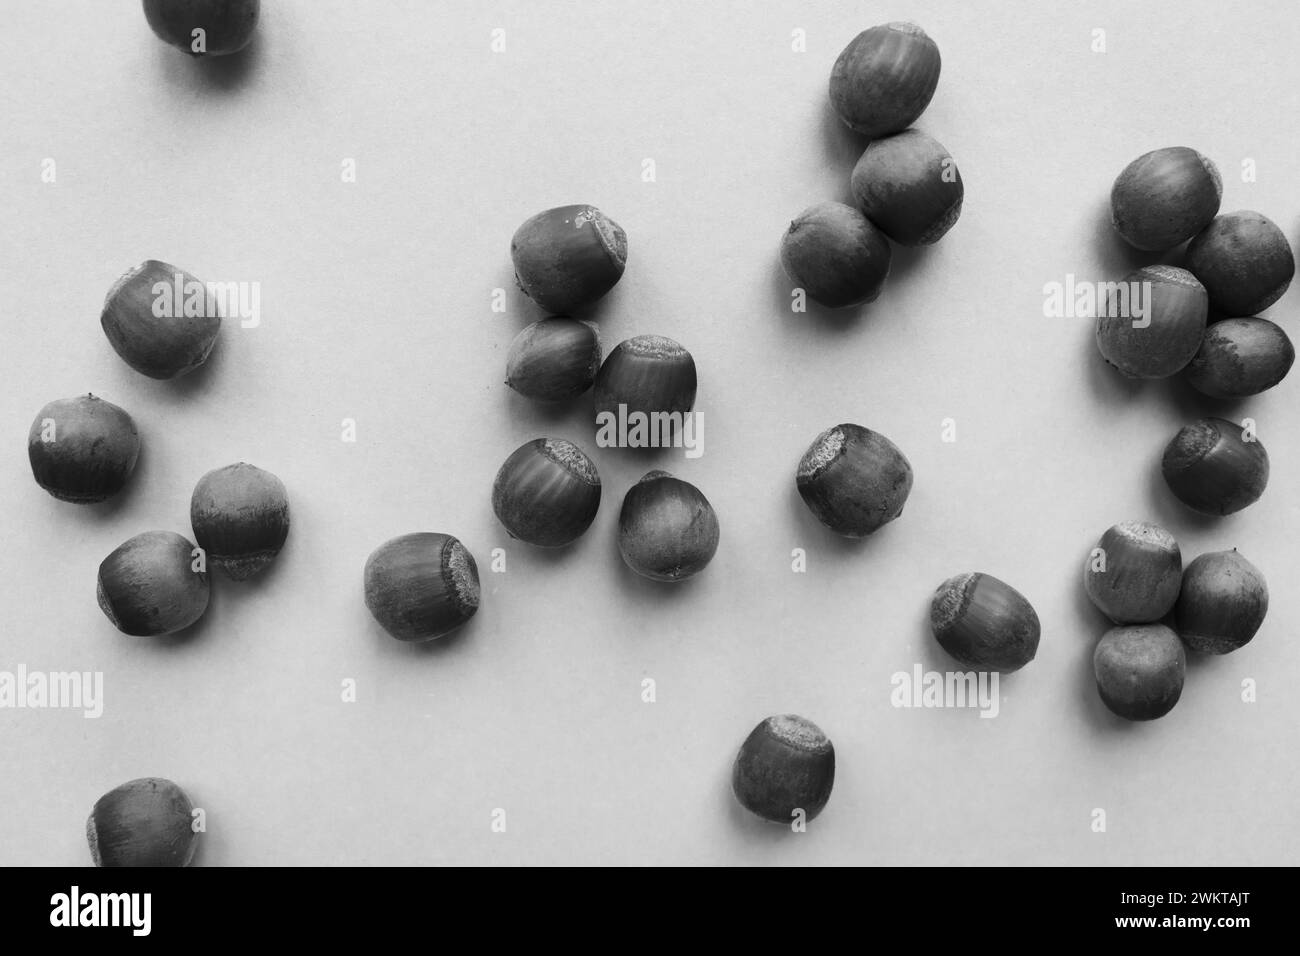 Heap of hazelnuts, black and white. Group of nuts, monochrome. Healthy food. Natural source of energy. Organic fat. Raw food concept. Vegetarian snack Stock Photo